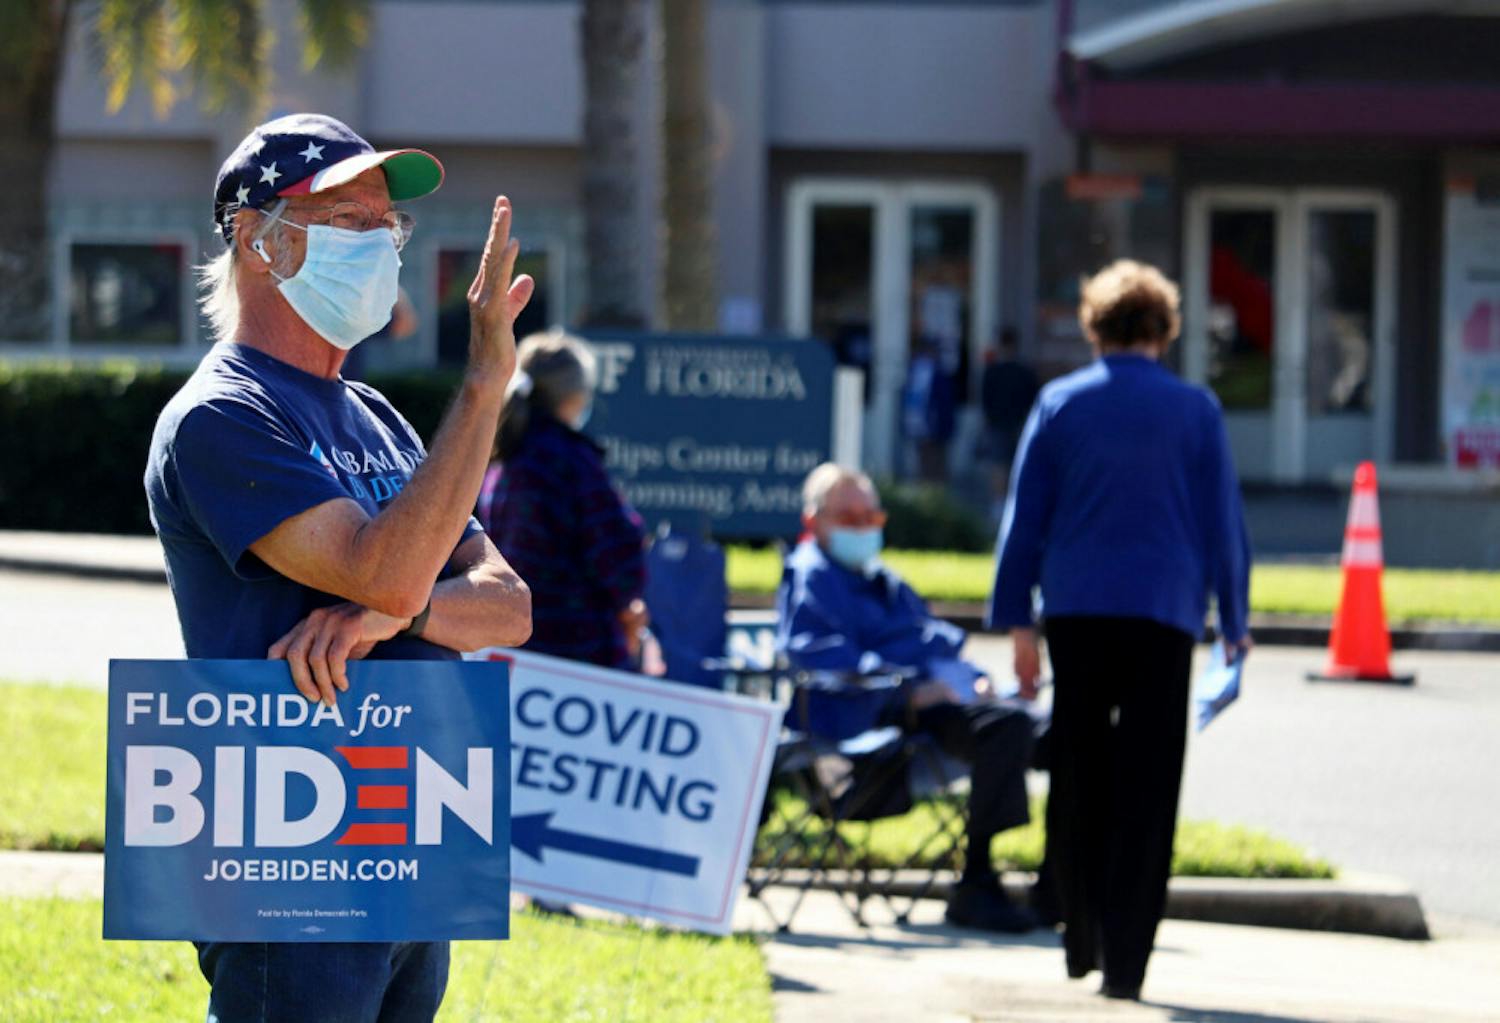 The Phillips Center for the Performing Arts had&nbsp;Election Day voting and drive-thru COVID testing&nbsp;on Tuesday, Nov. 3, 2020 in Gainesville, Fla.